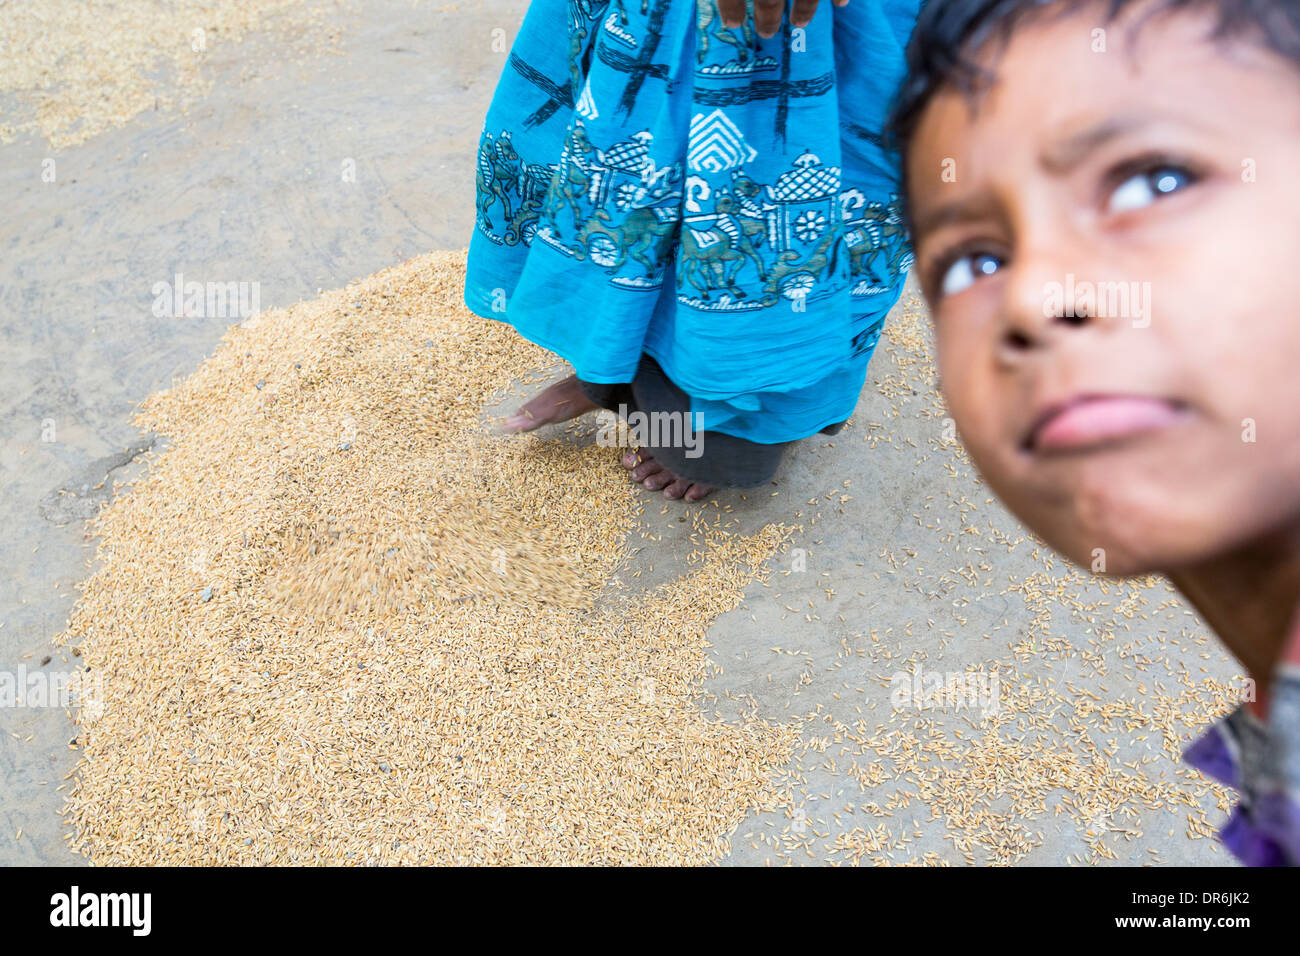 Villagers in a remote subsistence farming village on an island in the Sunderbans, the Ganges Delta in Eastern India drying rice Stock Photo